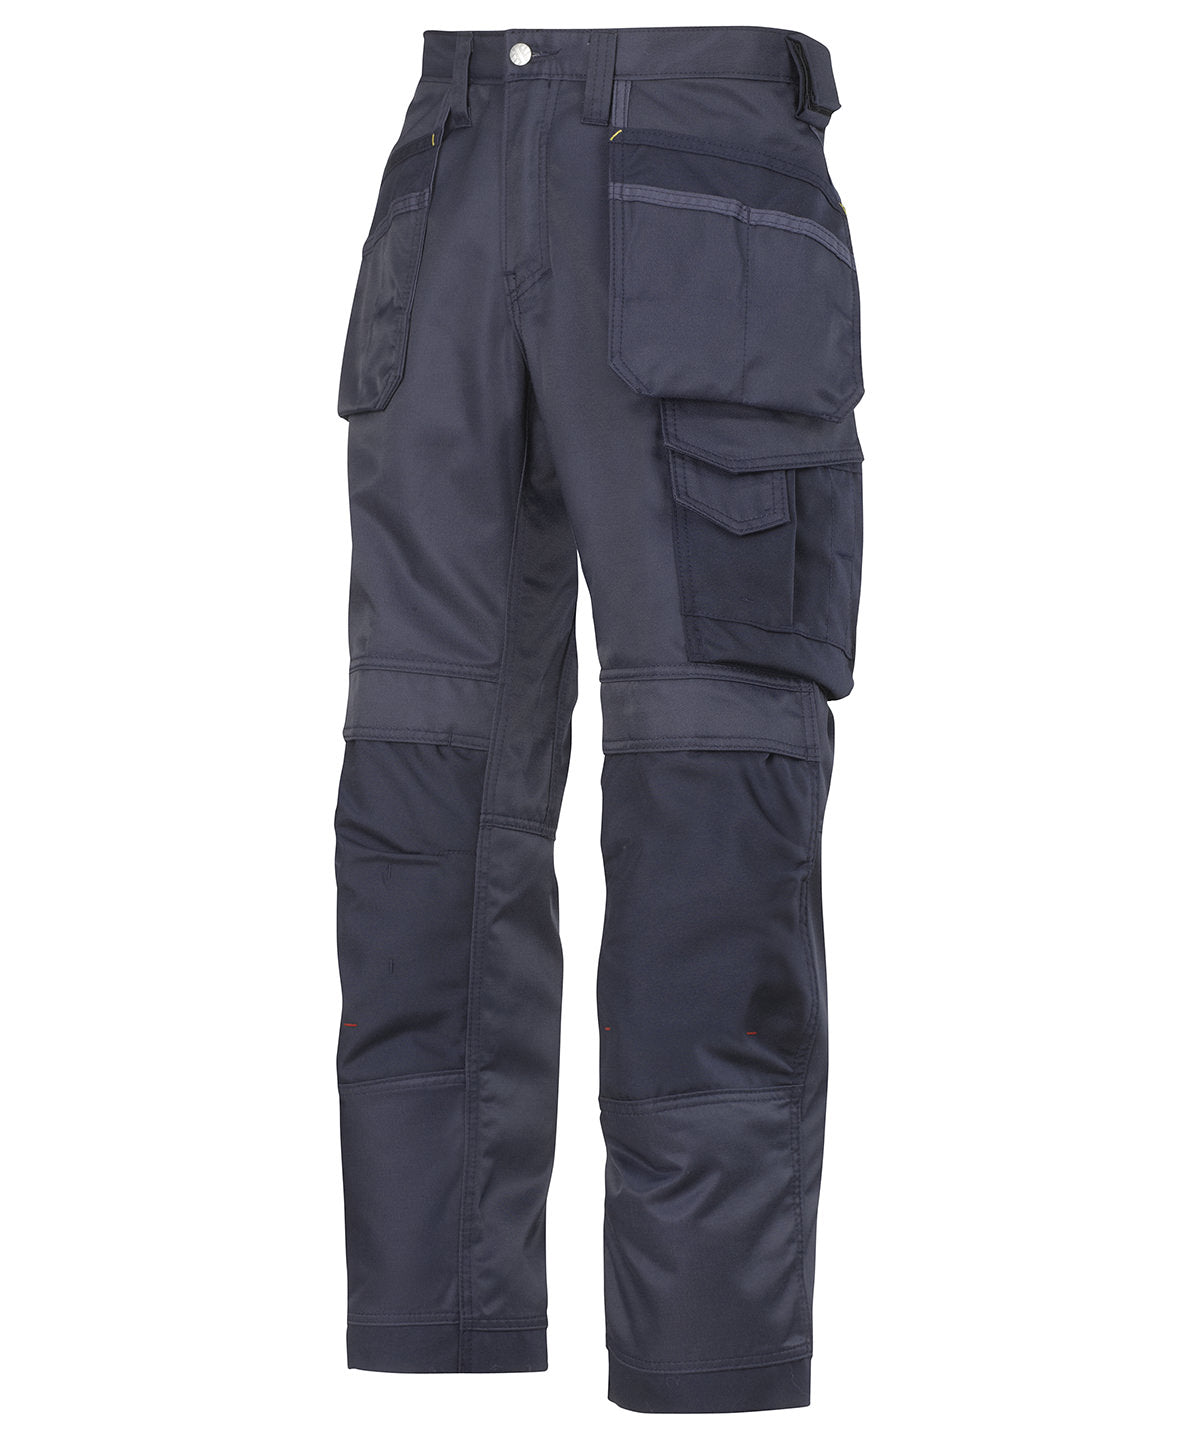 Snickers 3212 Duratwill Craftsmen Trousers